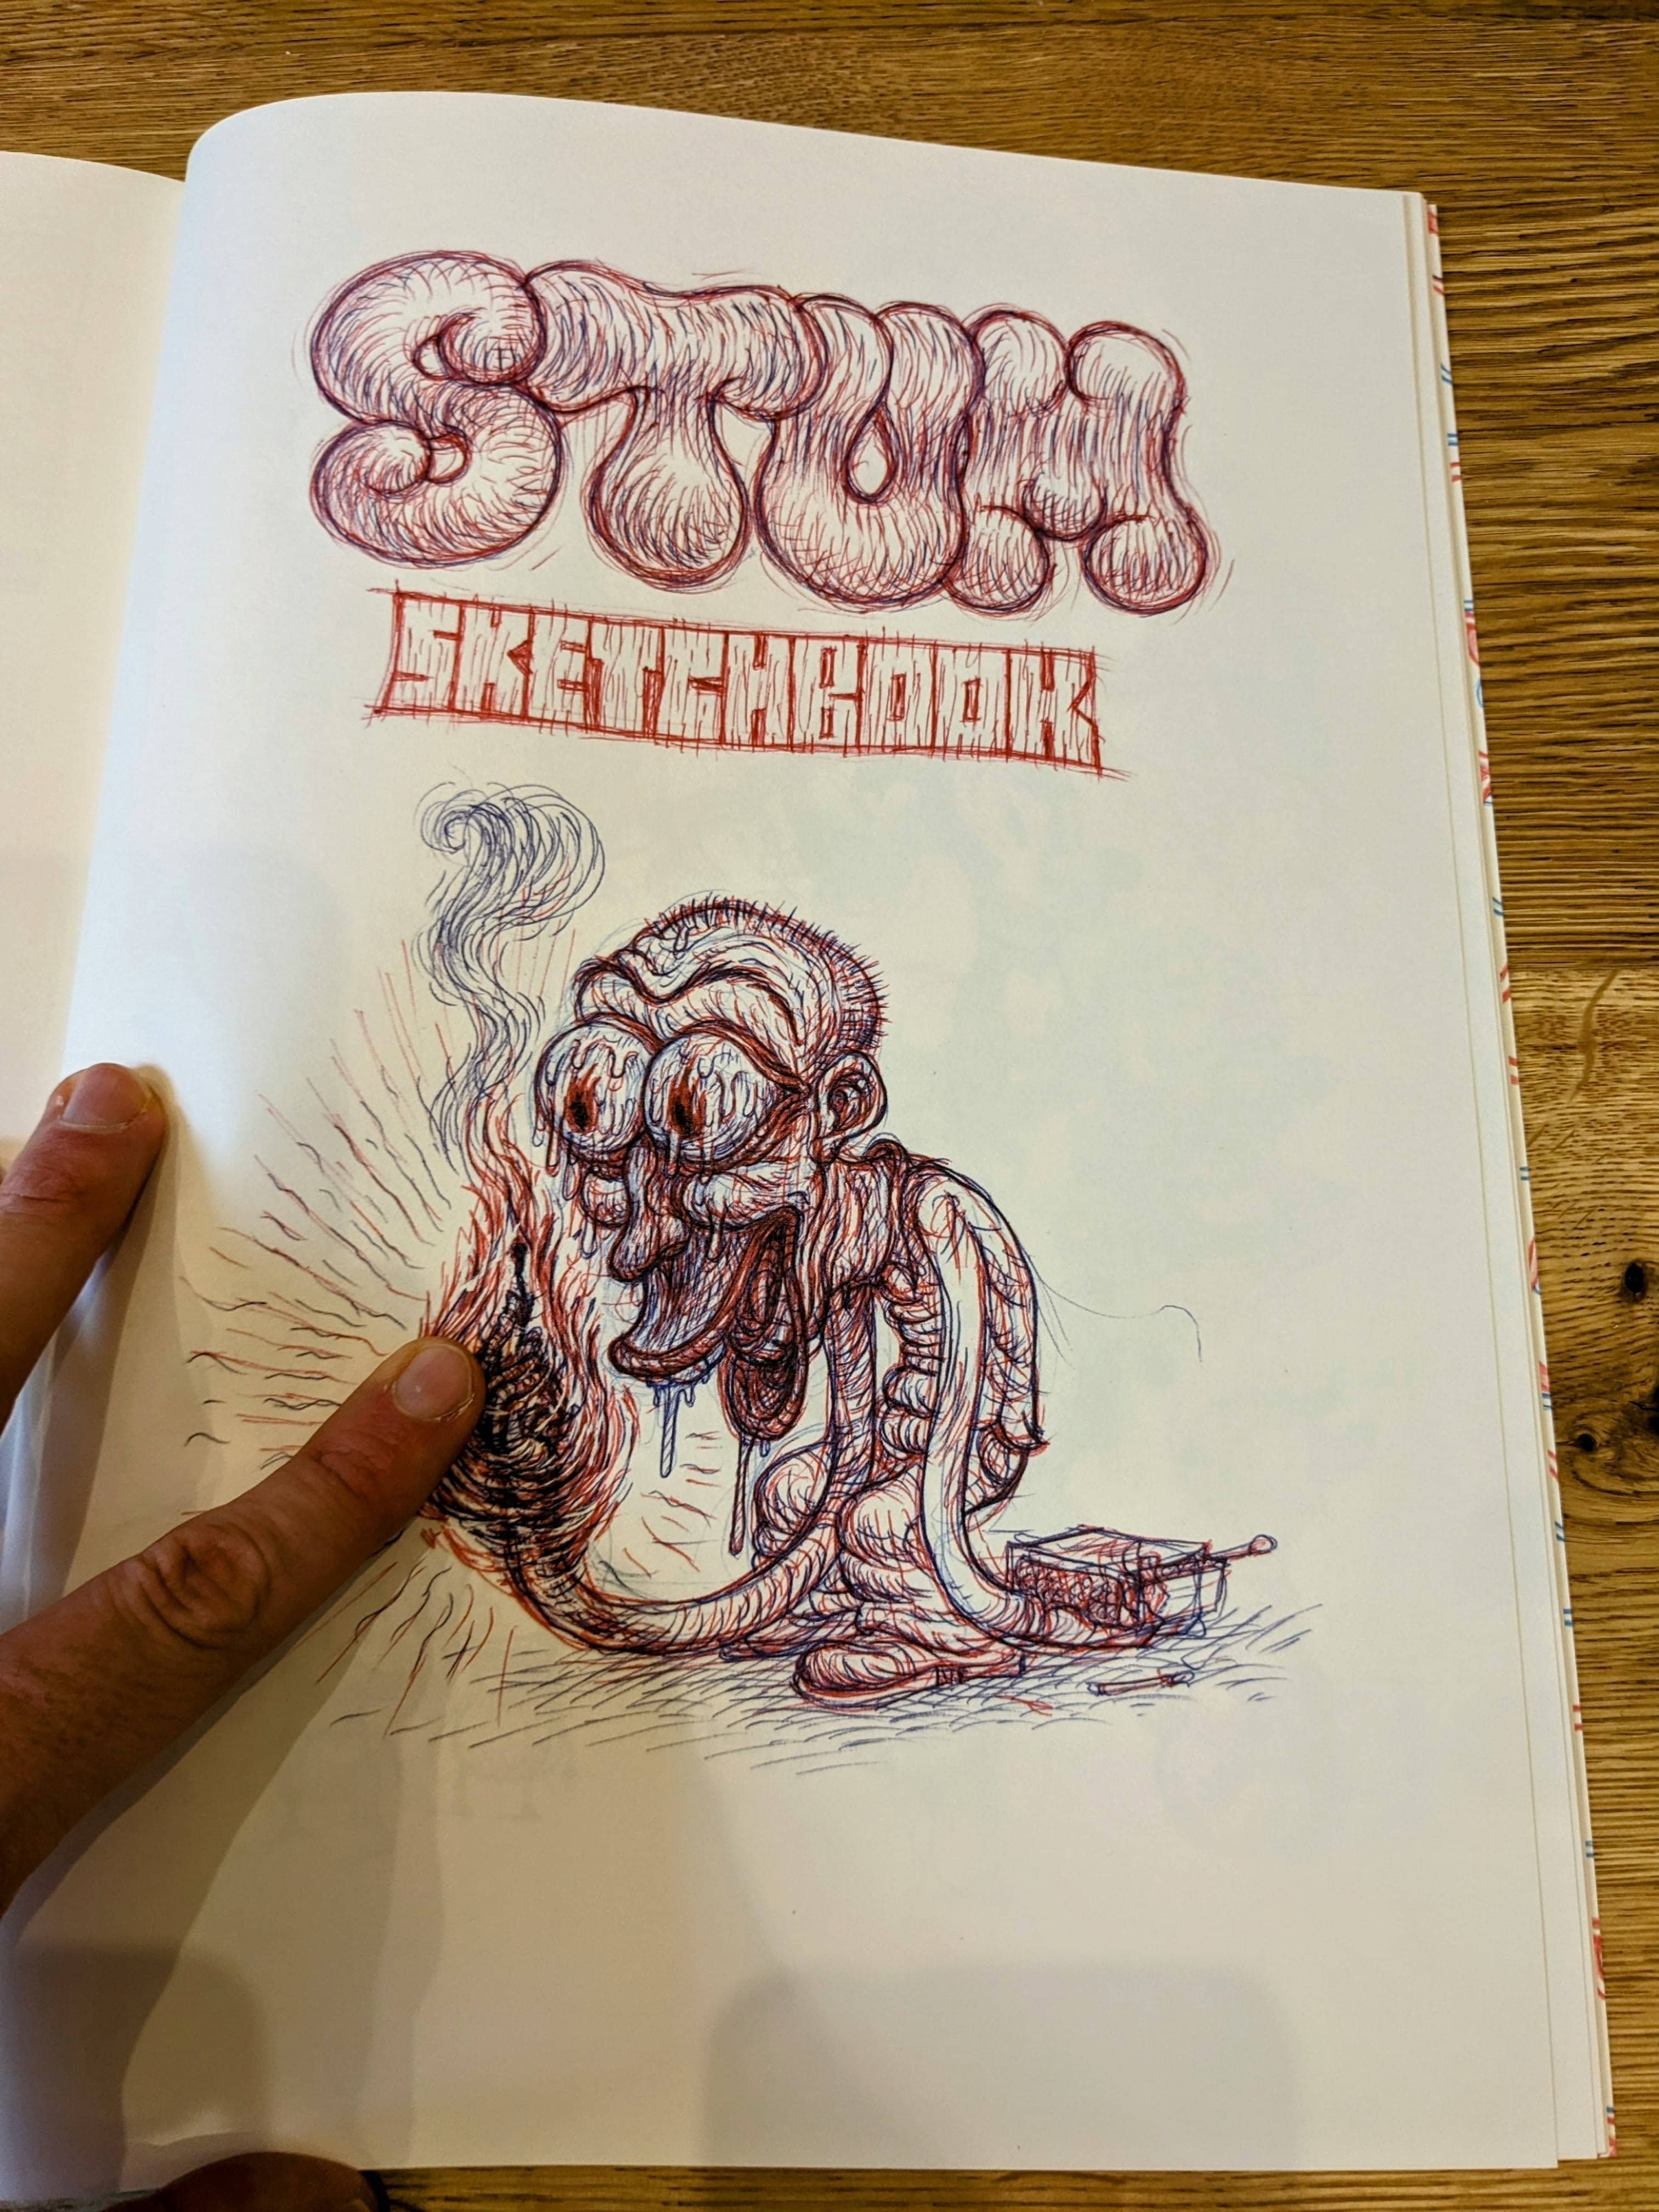 STUM - 99 COPIES LIMITED EDITION ( 16 EXCLUSIVE PAGES ) + 2 A4 SIGNED PRINT